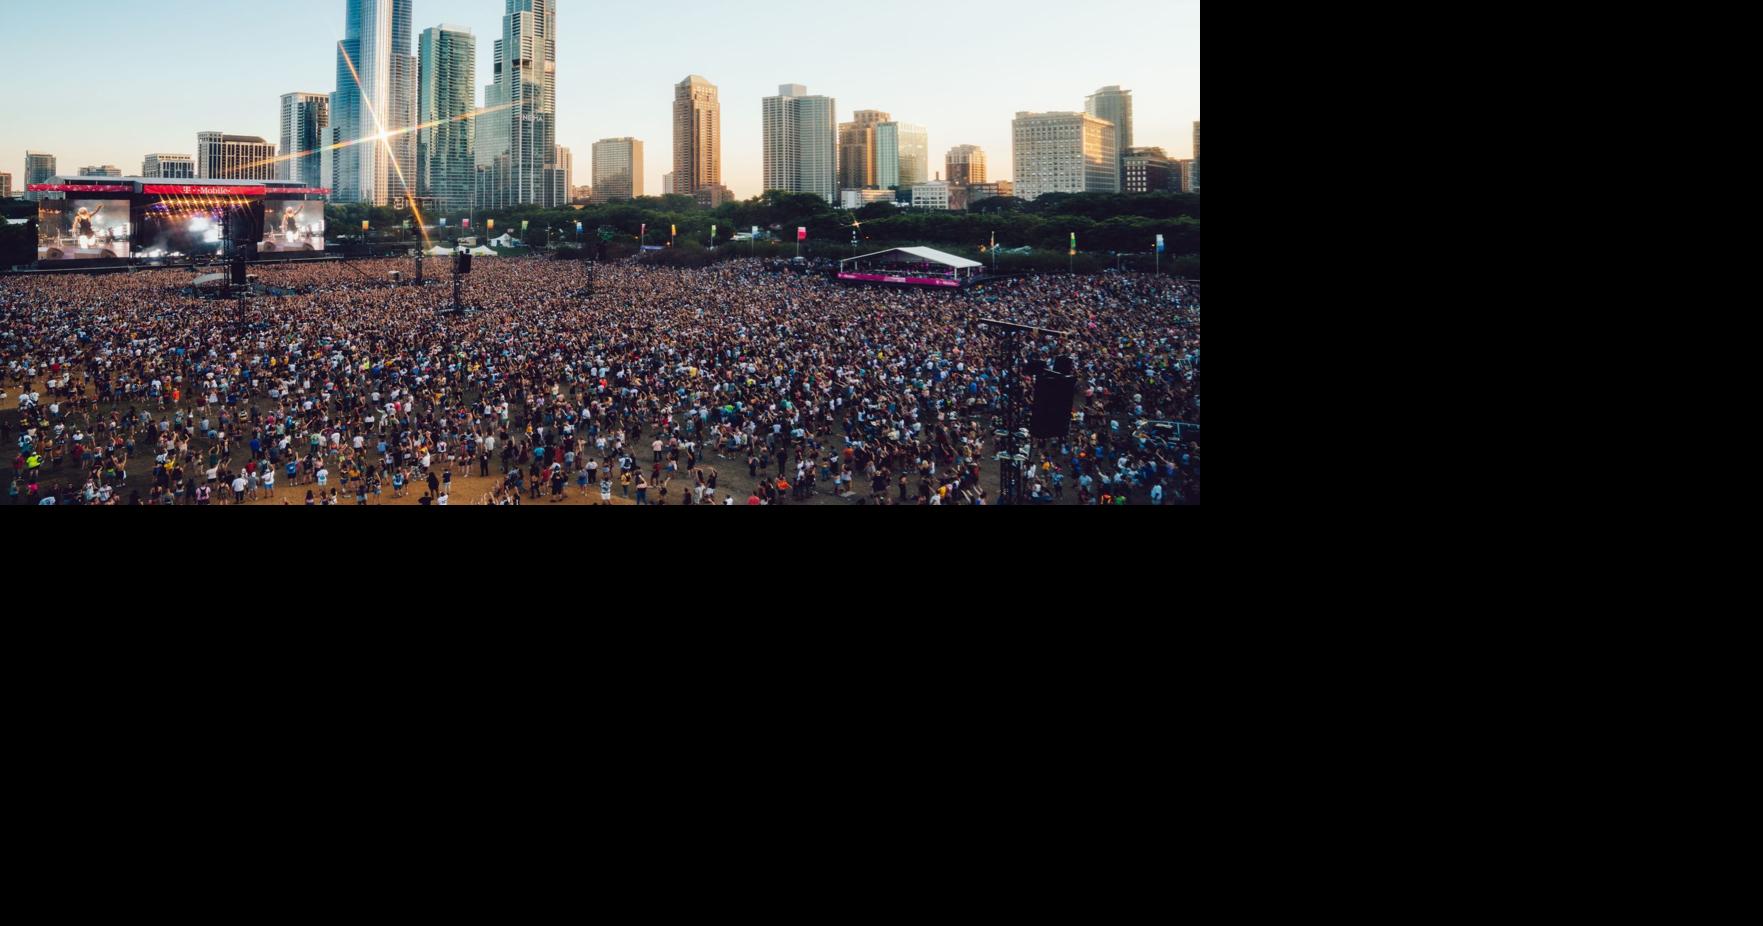 10 Ways Lollapalooza Will Ruin Your Weekend (Yes, Even If You're Not Going)